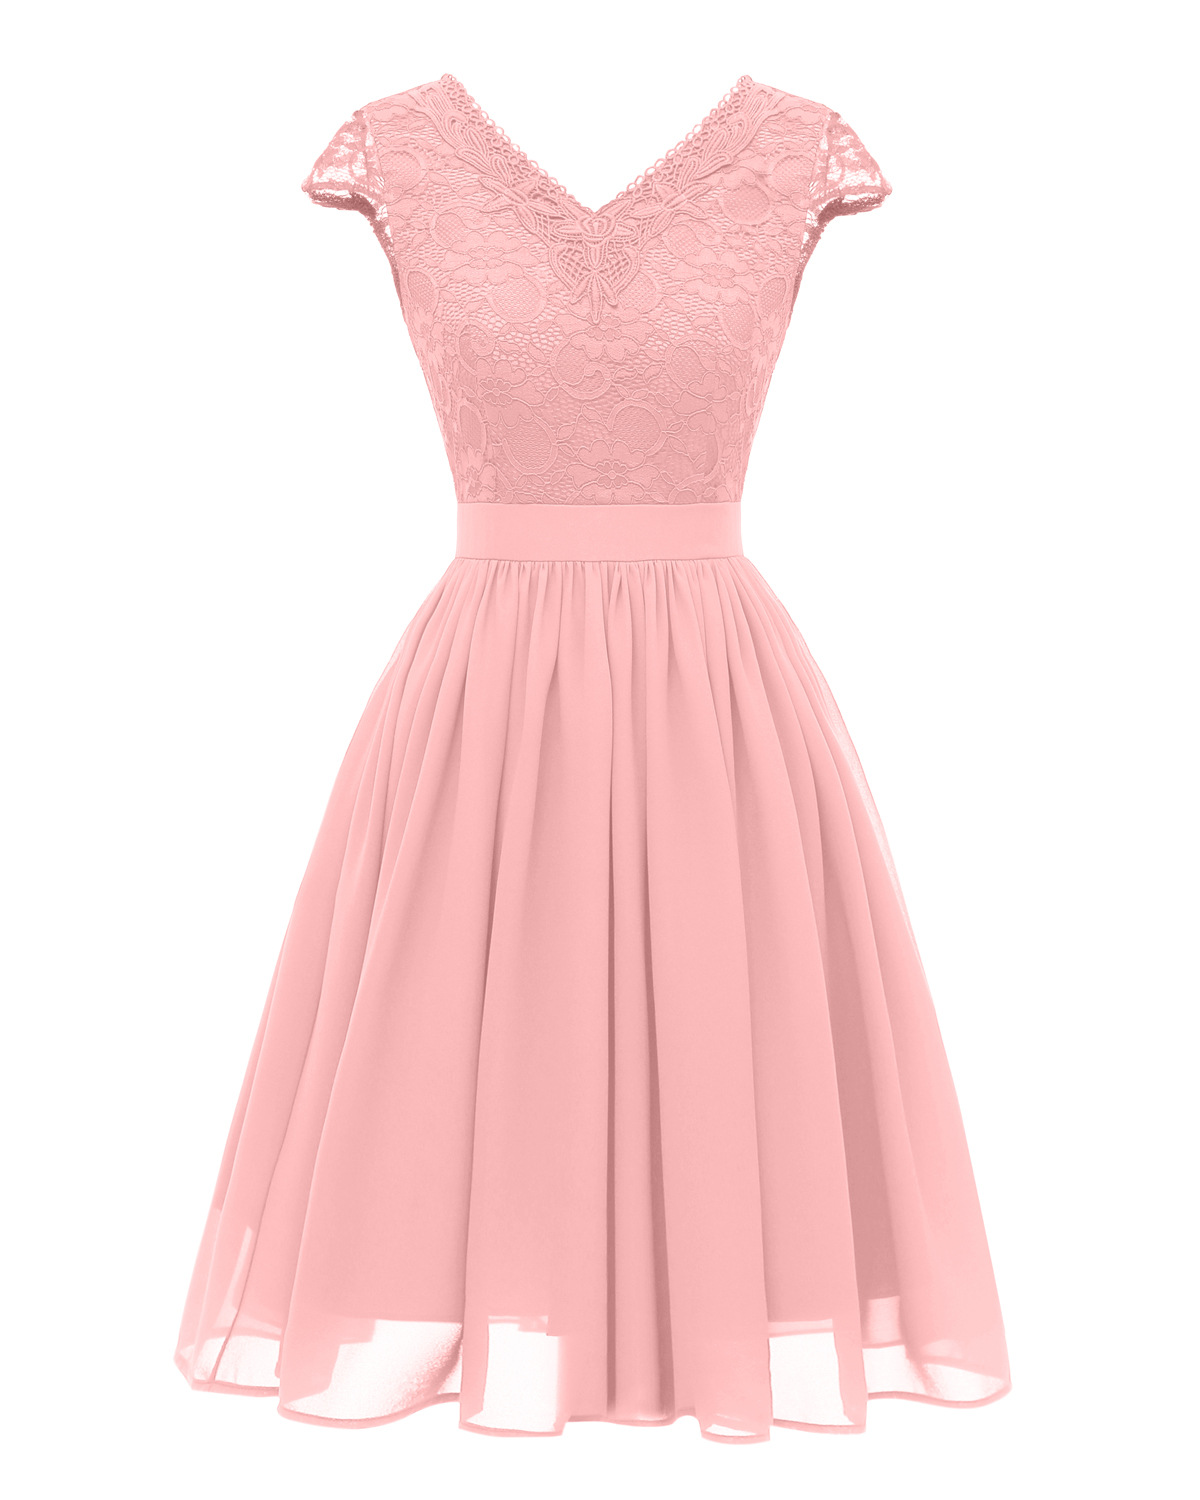 Women Casual Dress V Neck Cap Sleeve Lace Rockabilly Summer A Line Work  Party Dress Pink on Luulla